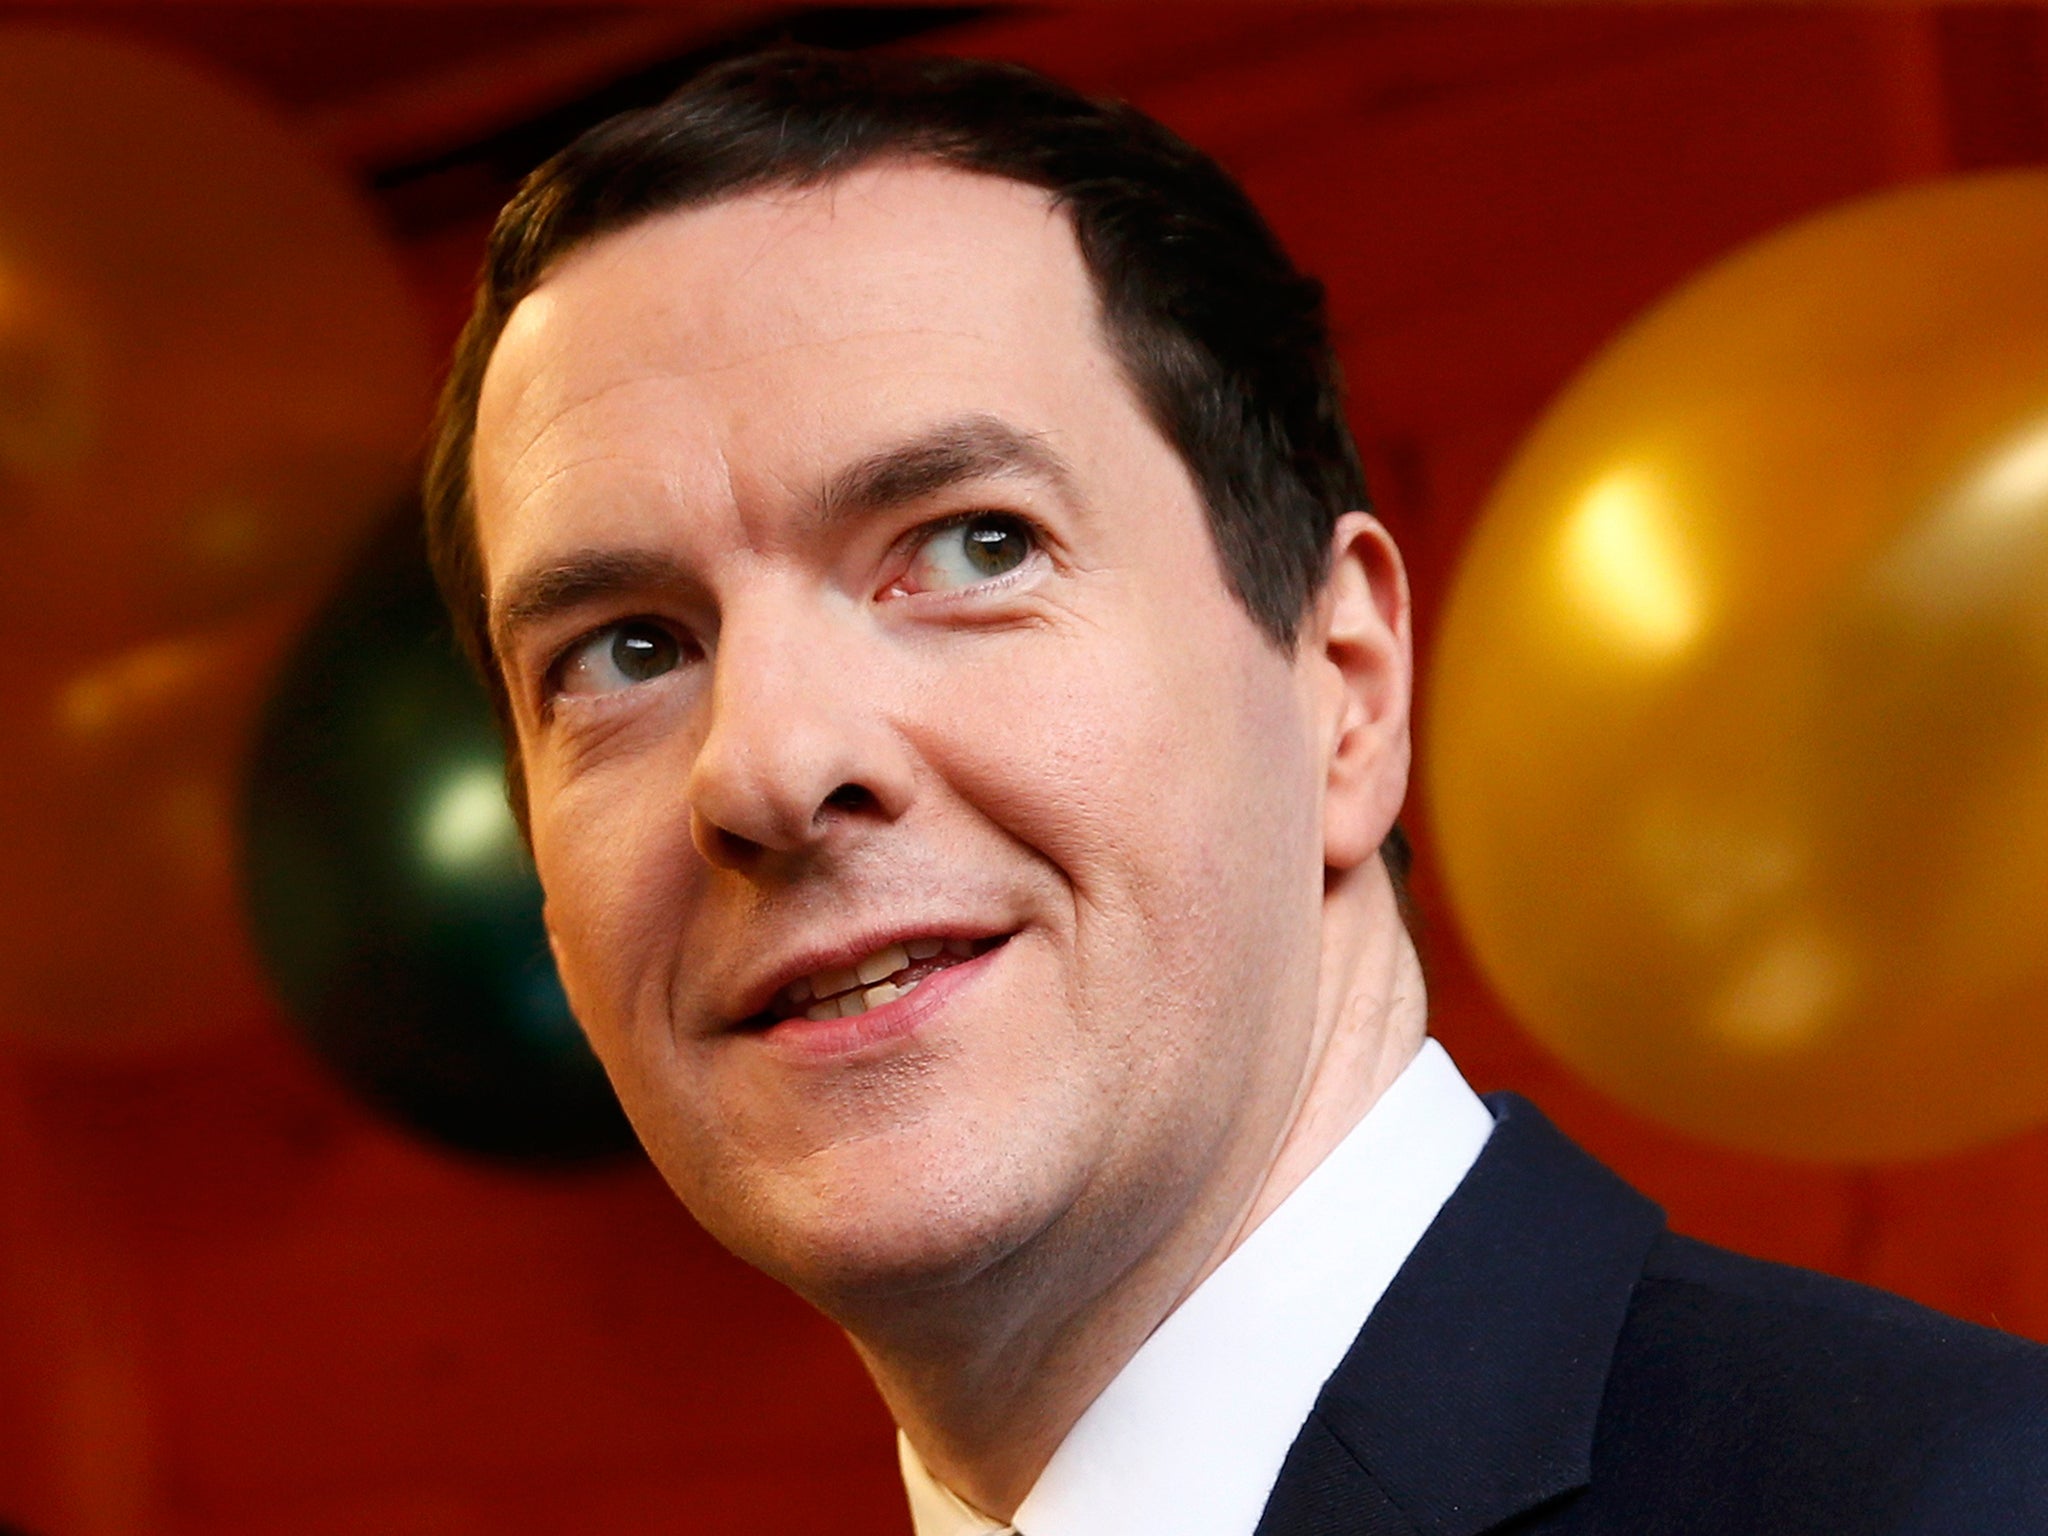 The Chancellor wants to save money by digitising tax returns